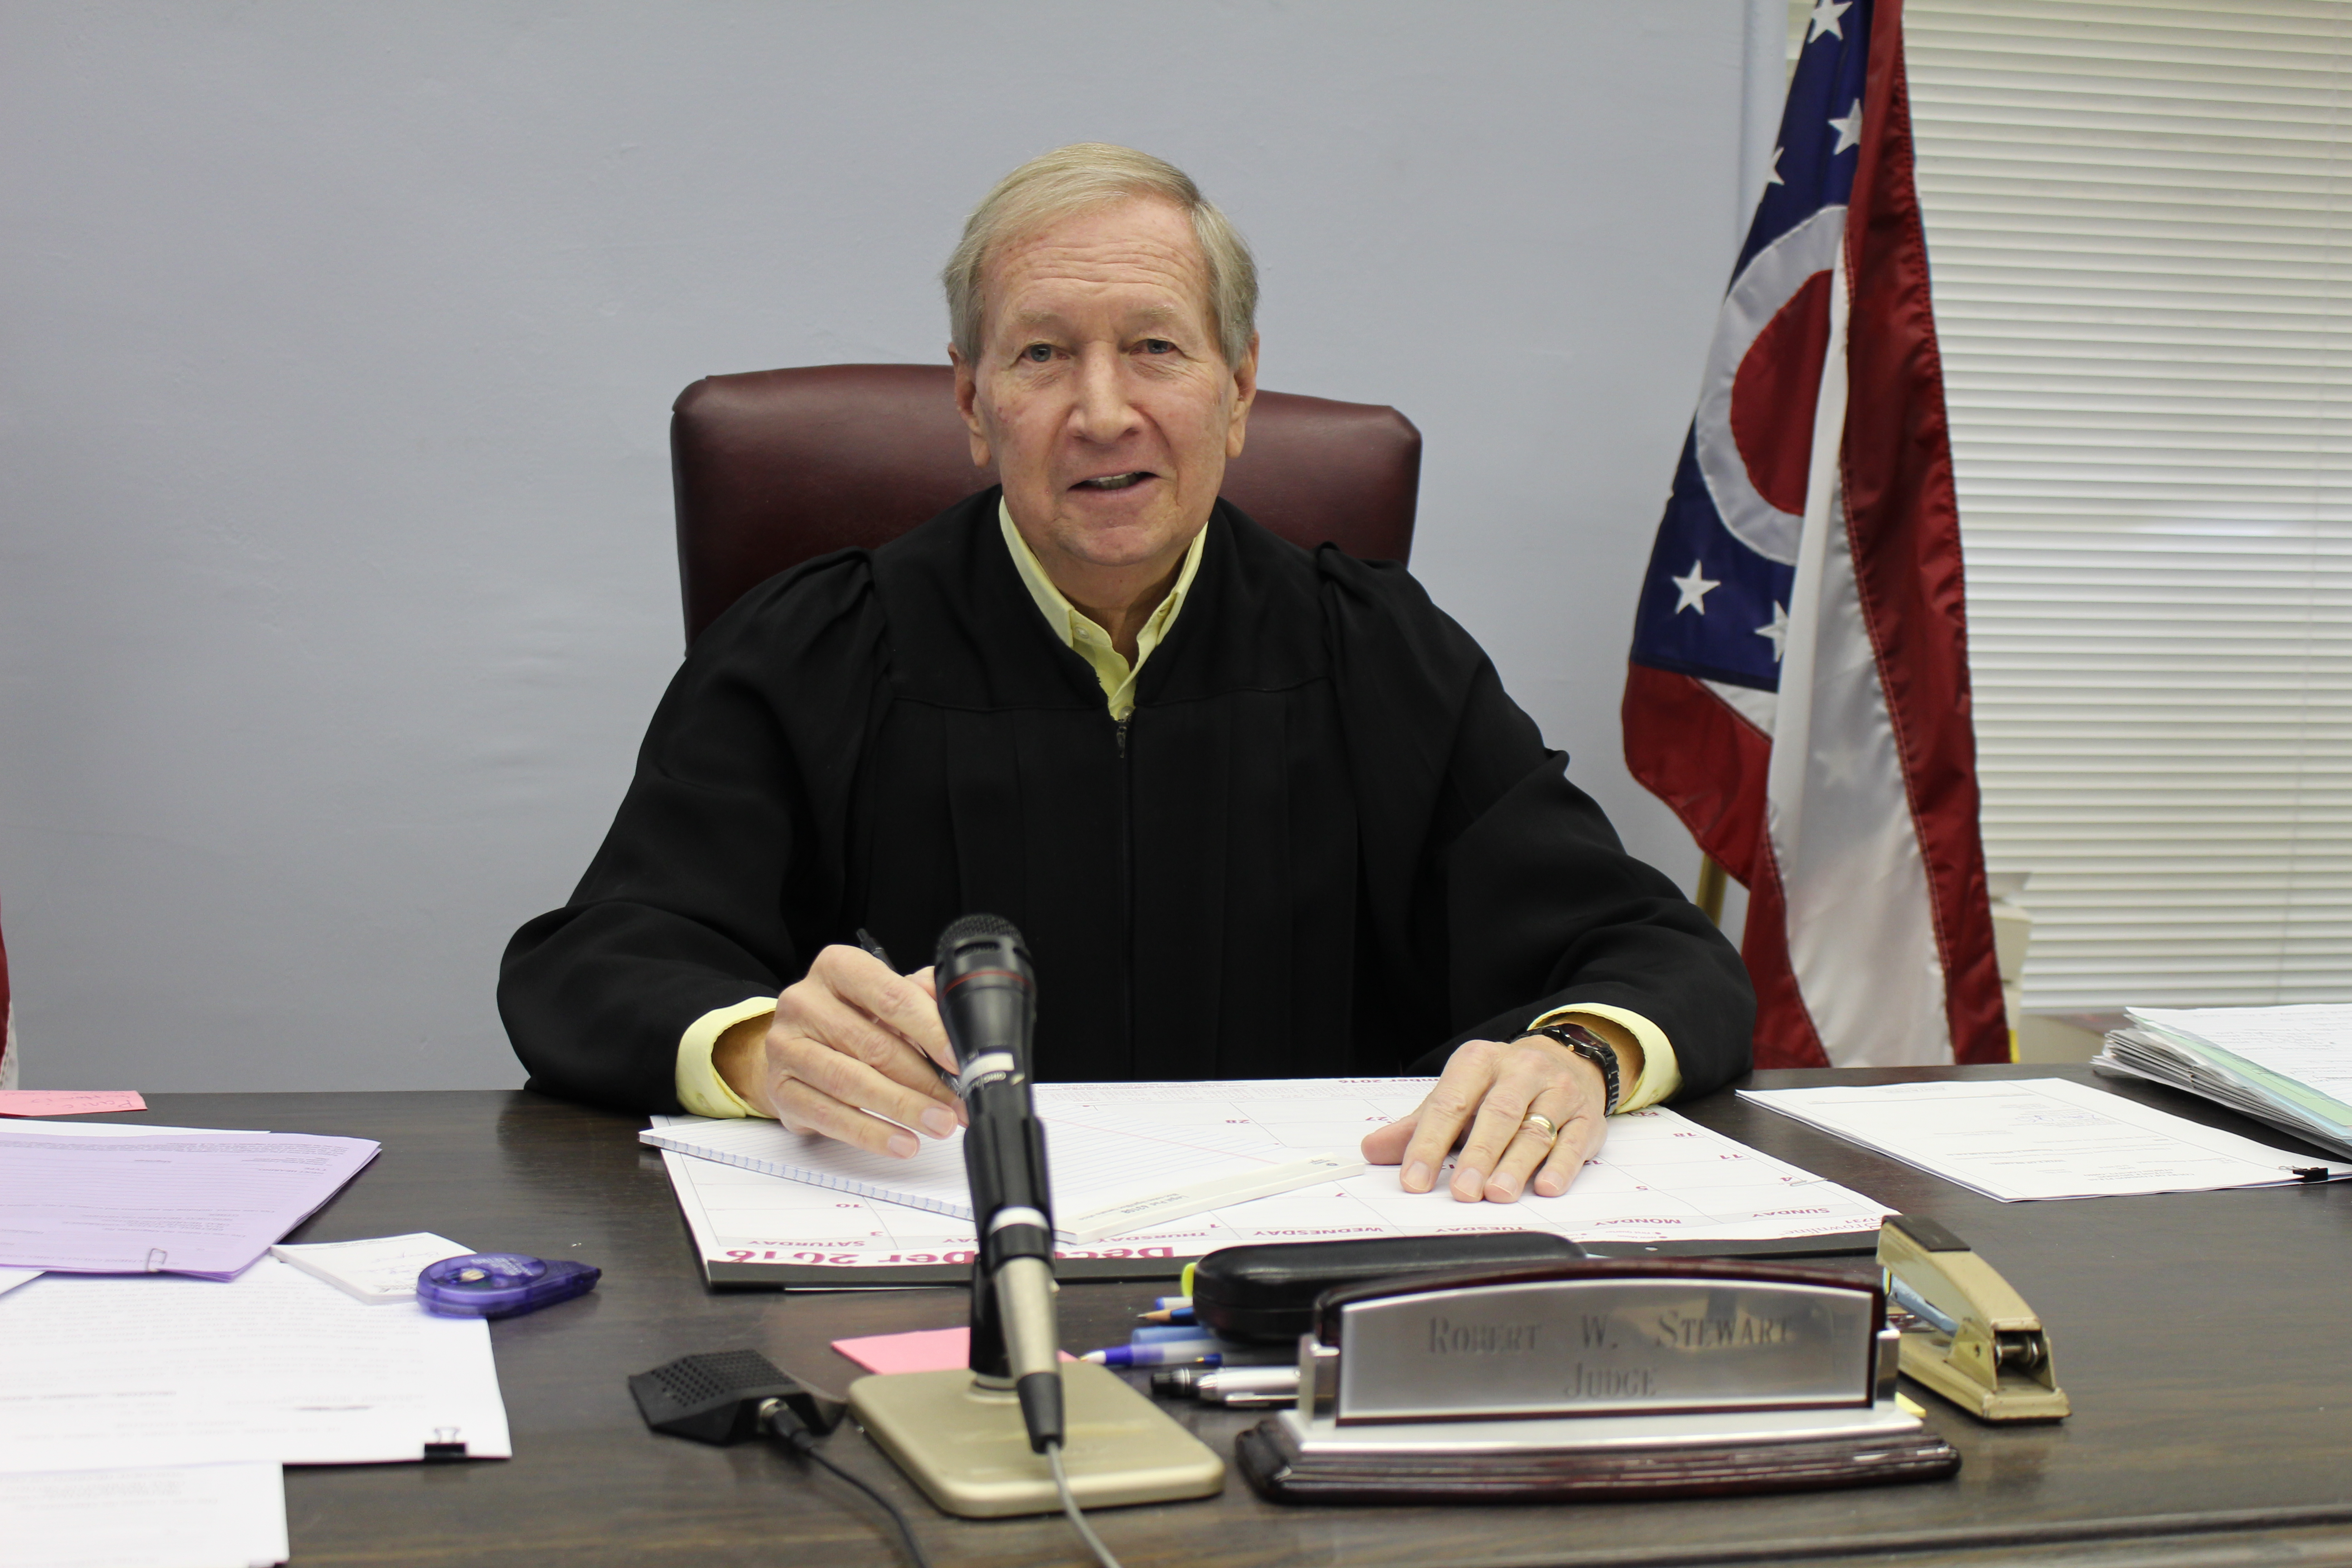 Athens County, Ohio, Judge Robert W. Stewart says CASA volunteers save the county money and provide a valuable service.